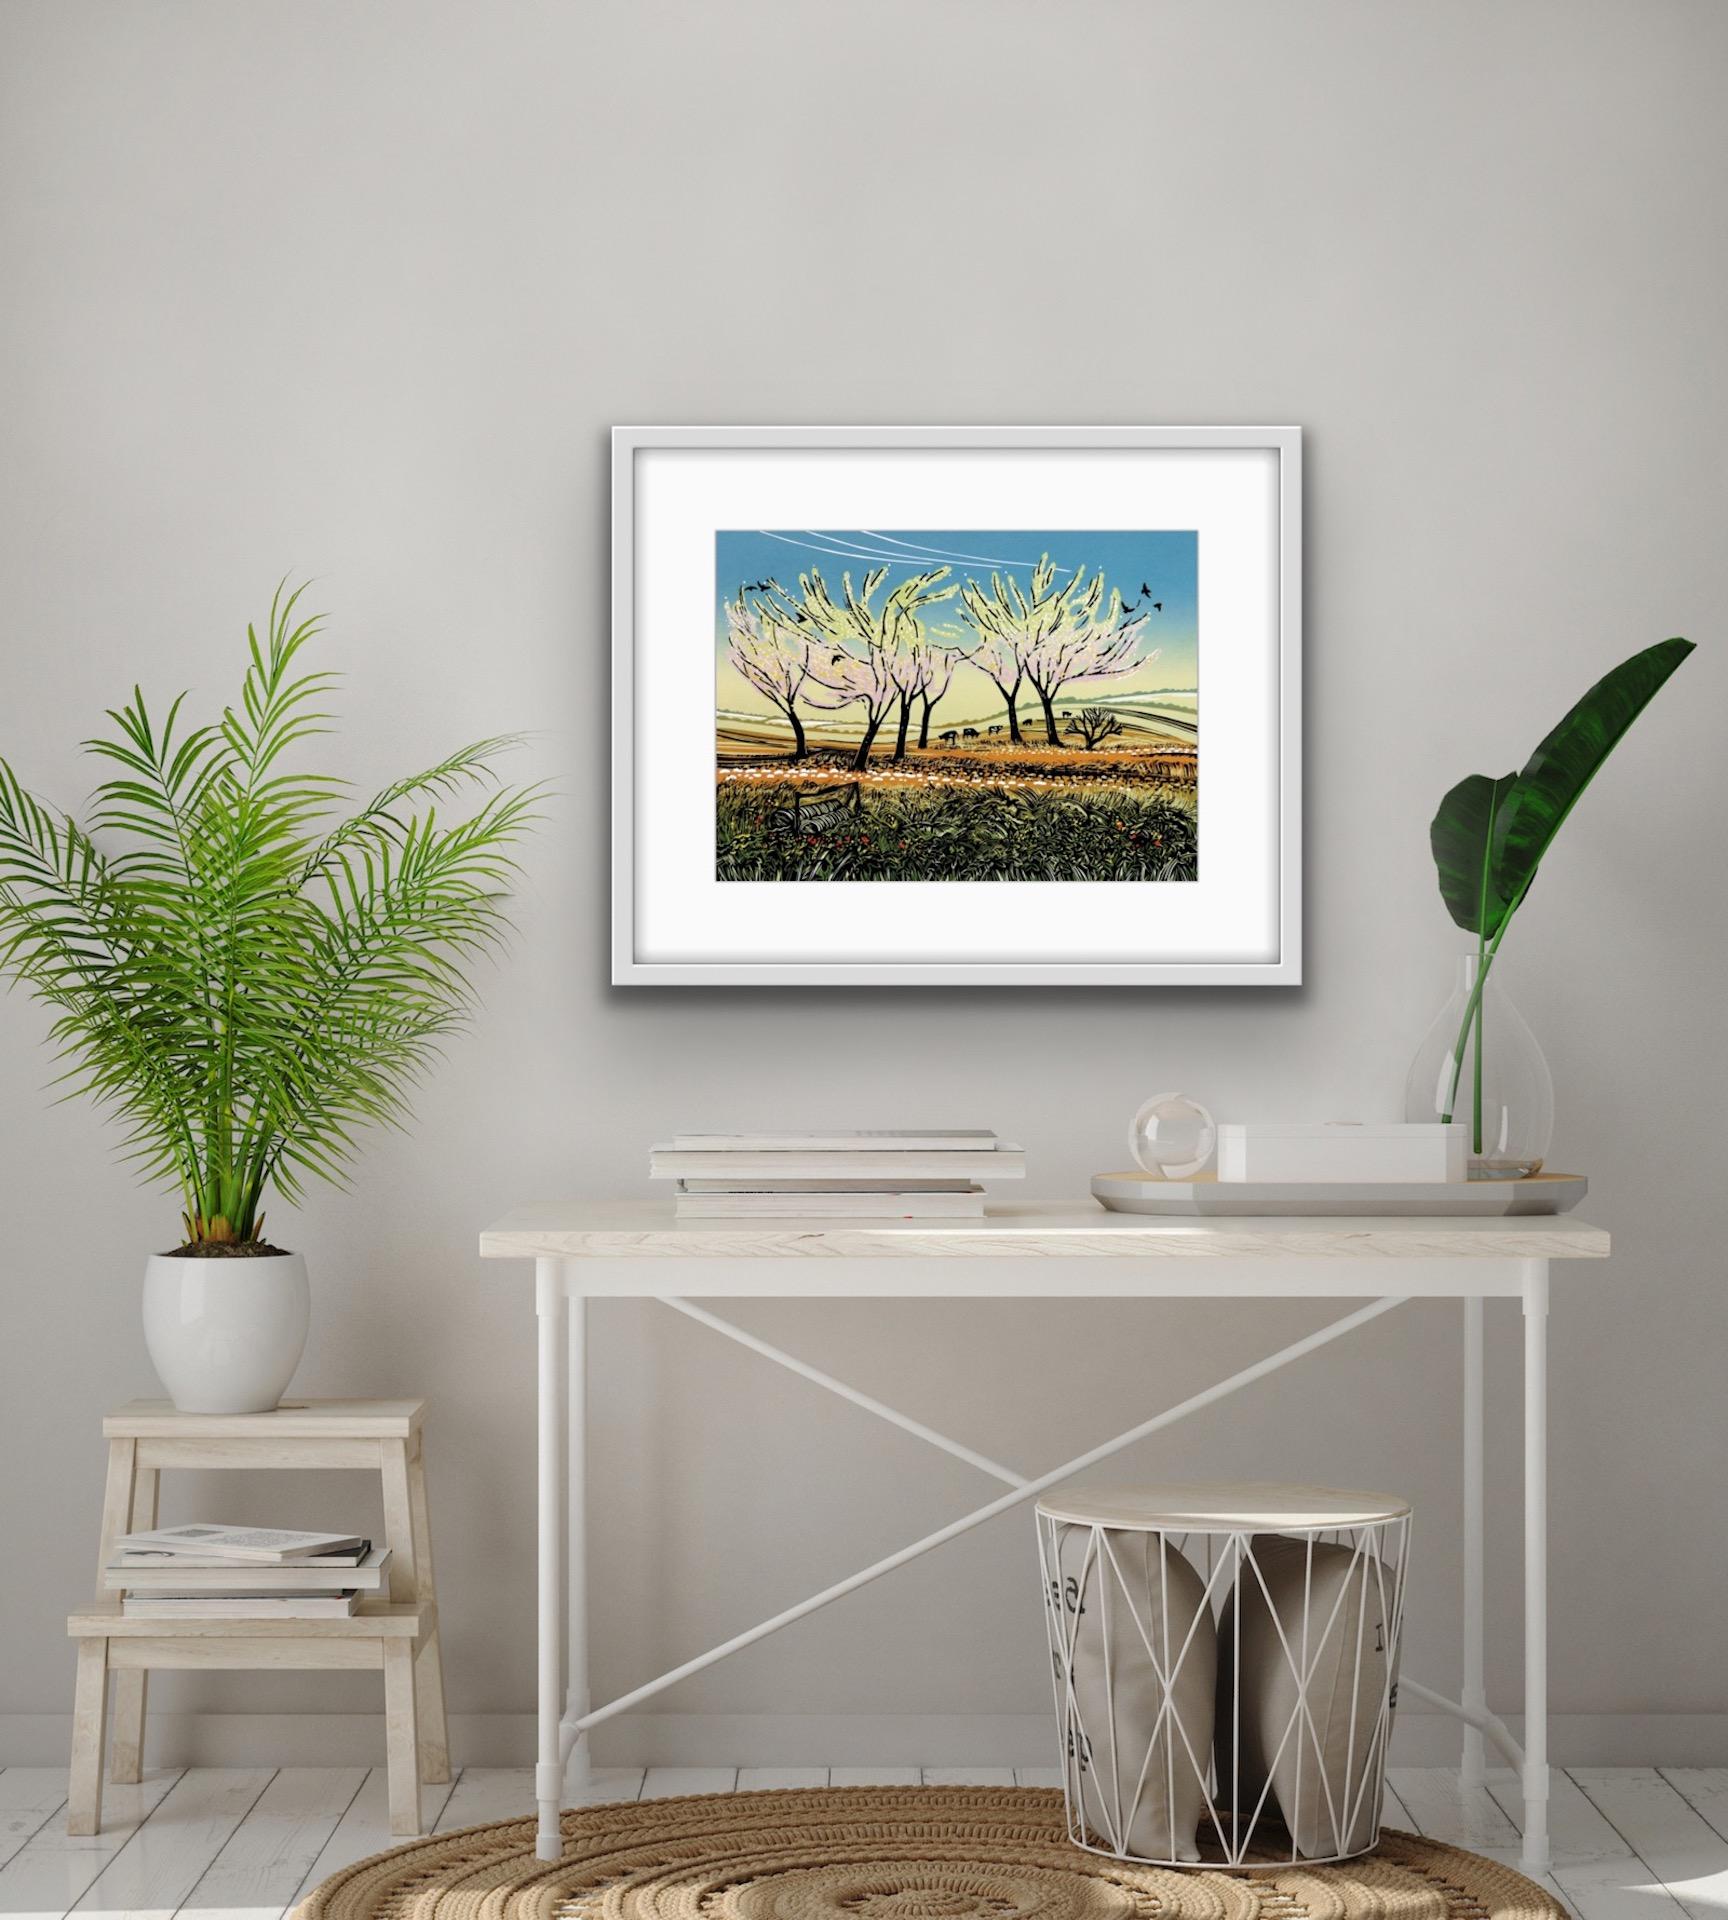 Rob Barnes, Blossom in the Wind, Limited Edition Landscape Print, Affordable Art 5